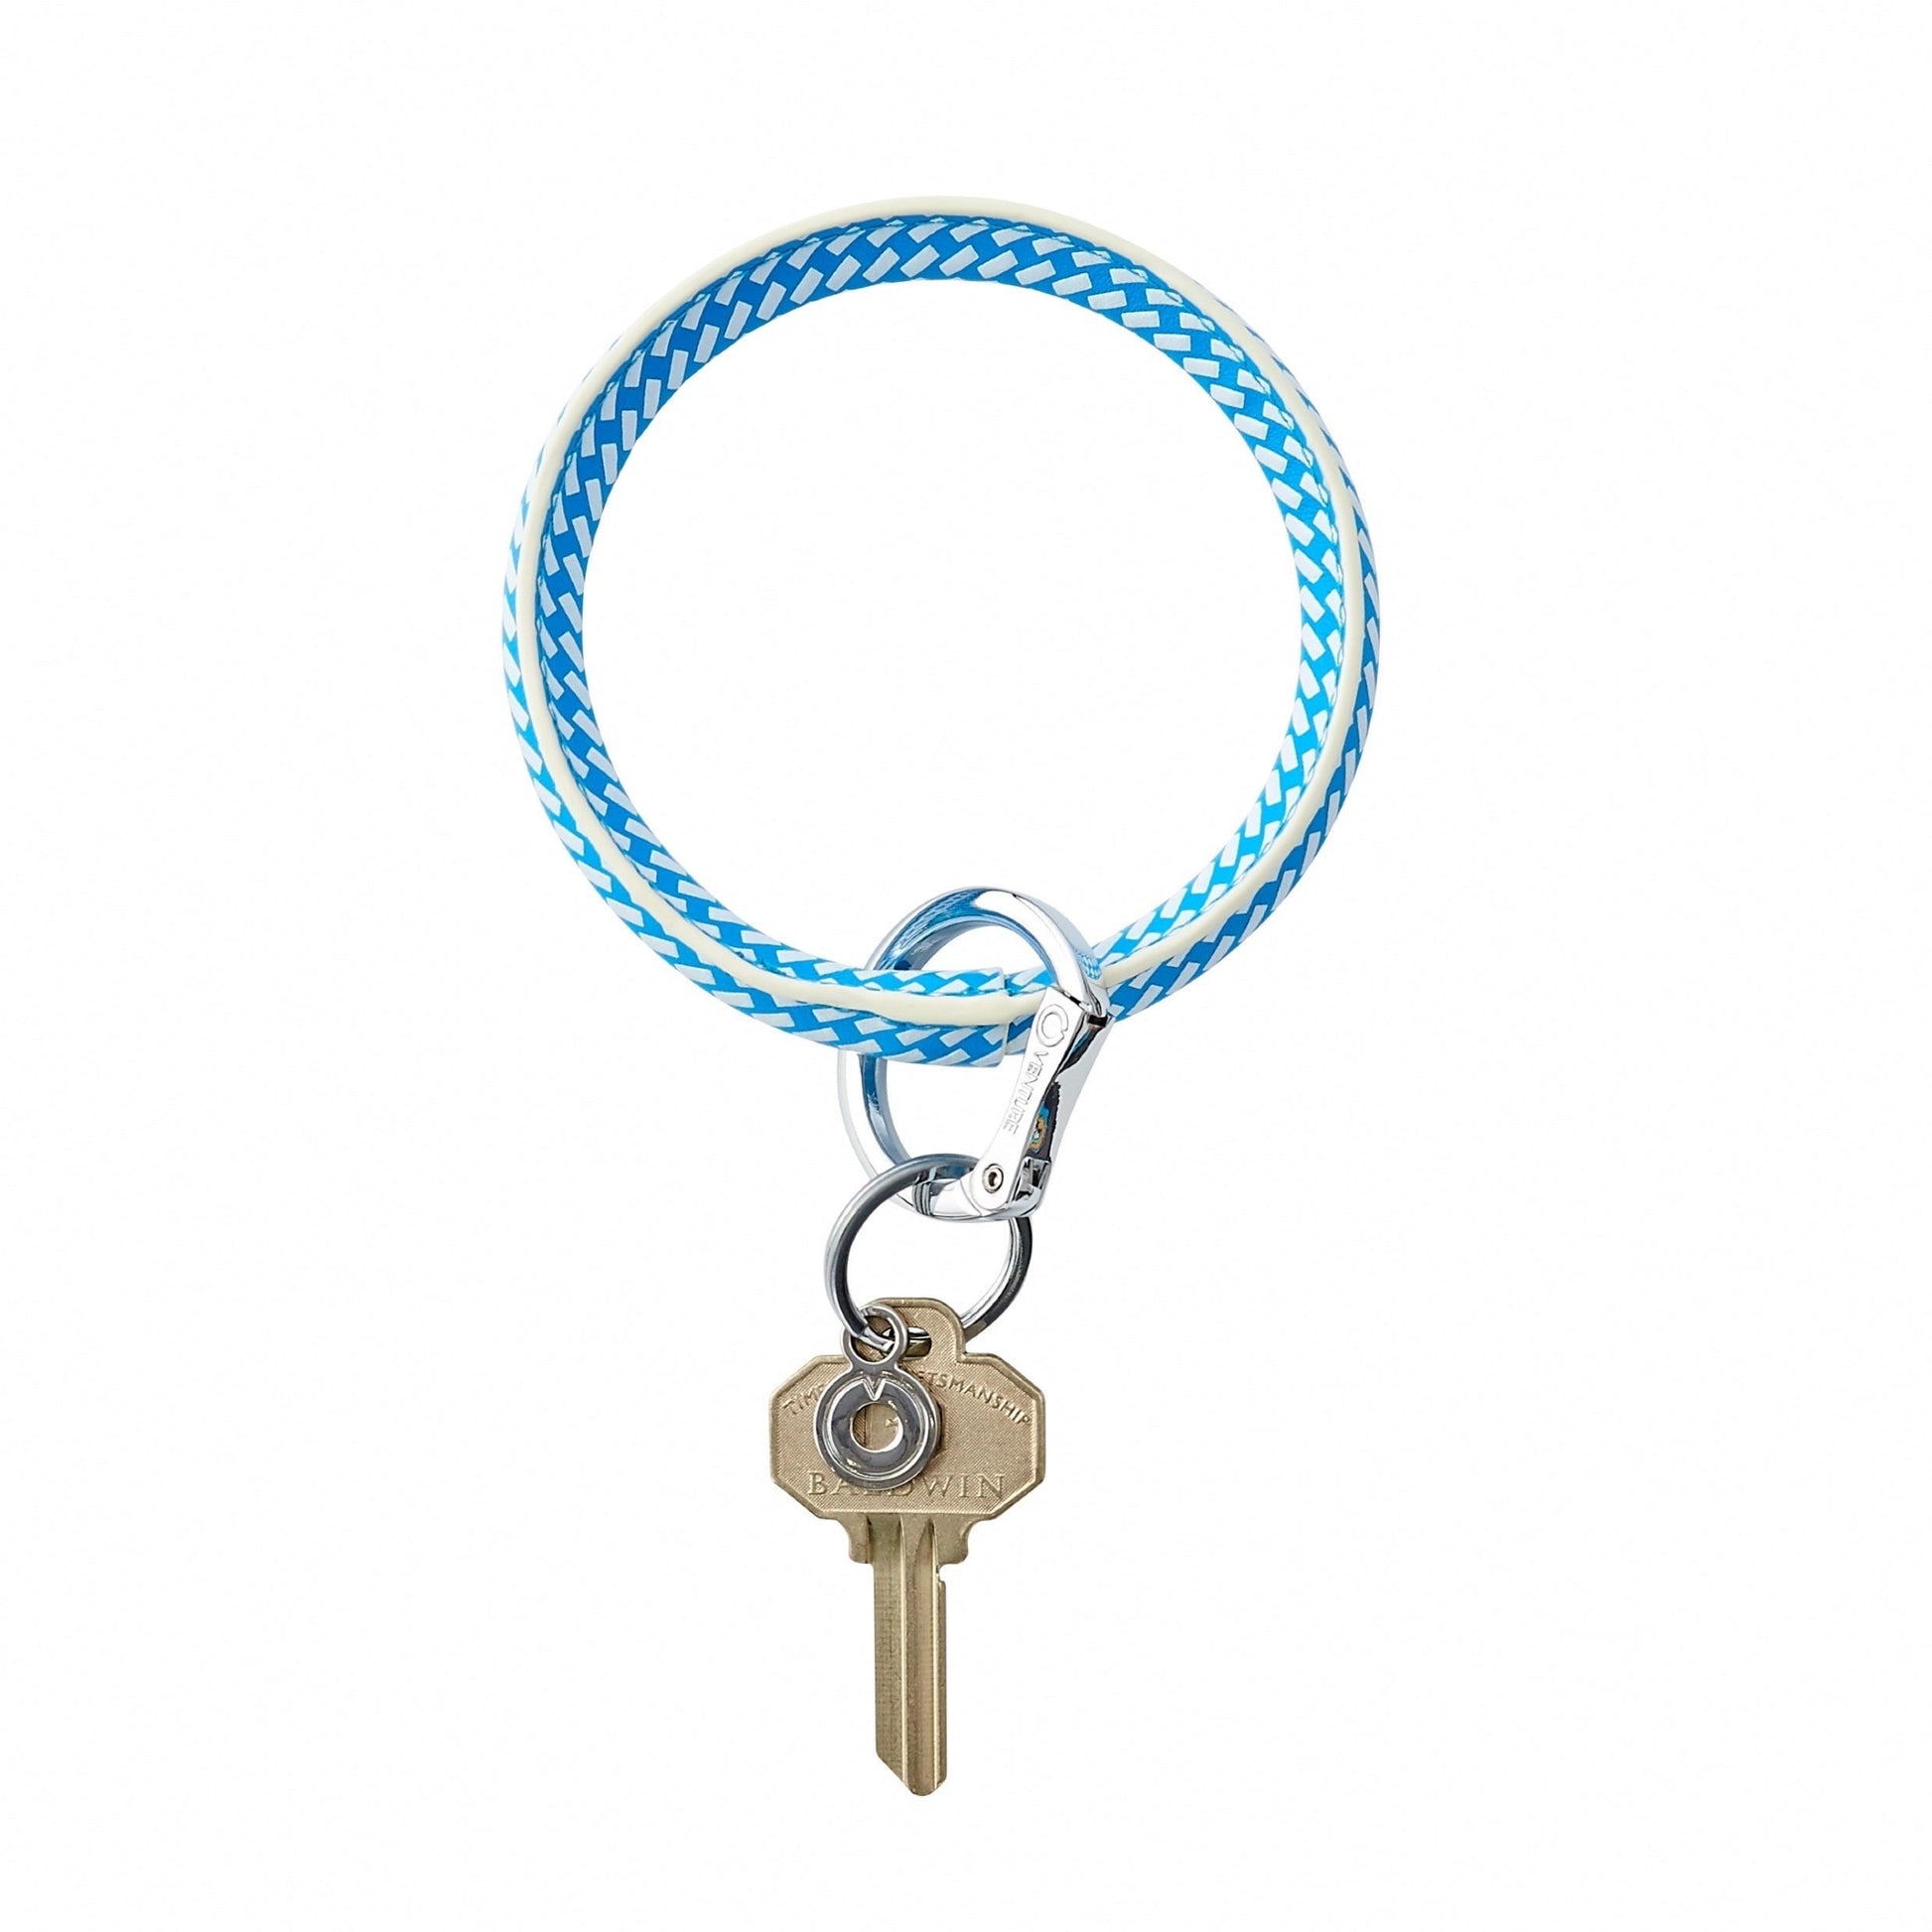 Blue and white braided leather big o key ring with silver locking clasp